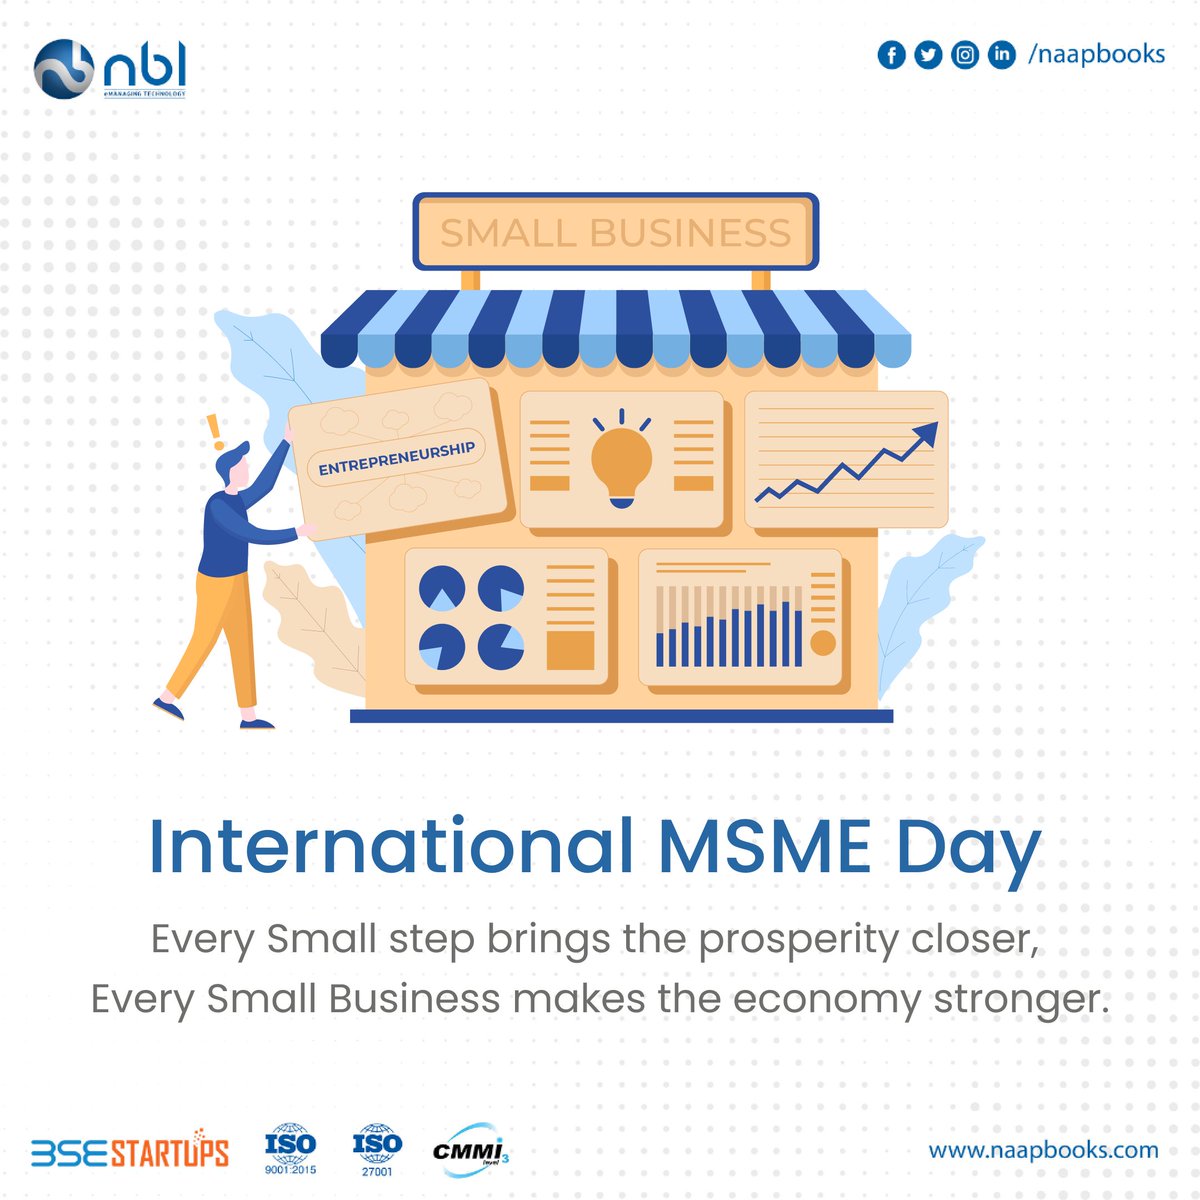 Each and Every #Business impacts the economy... Let's #Grow together🤝 and build a better #future with MSMEs with the International #MSME Day. 
.
.
.
.
.
.

 #MSMEDay #smallbusiness #msmeindia #economygrowth #InternationalMSMEDay  #smallbusinessbigdreams #startups